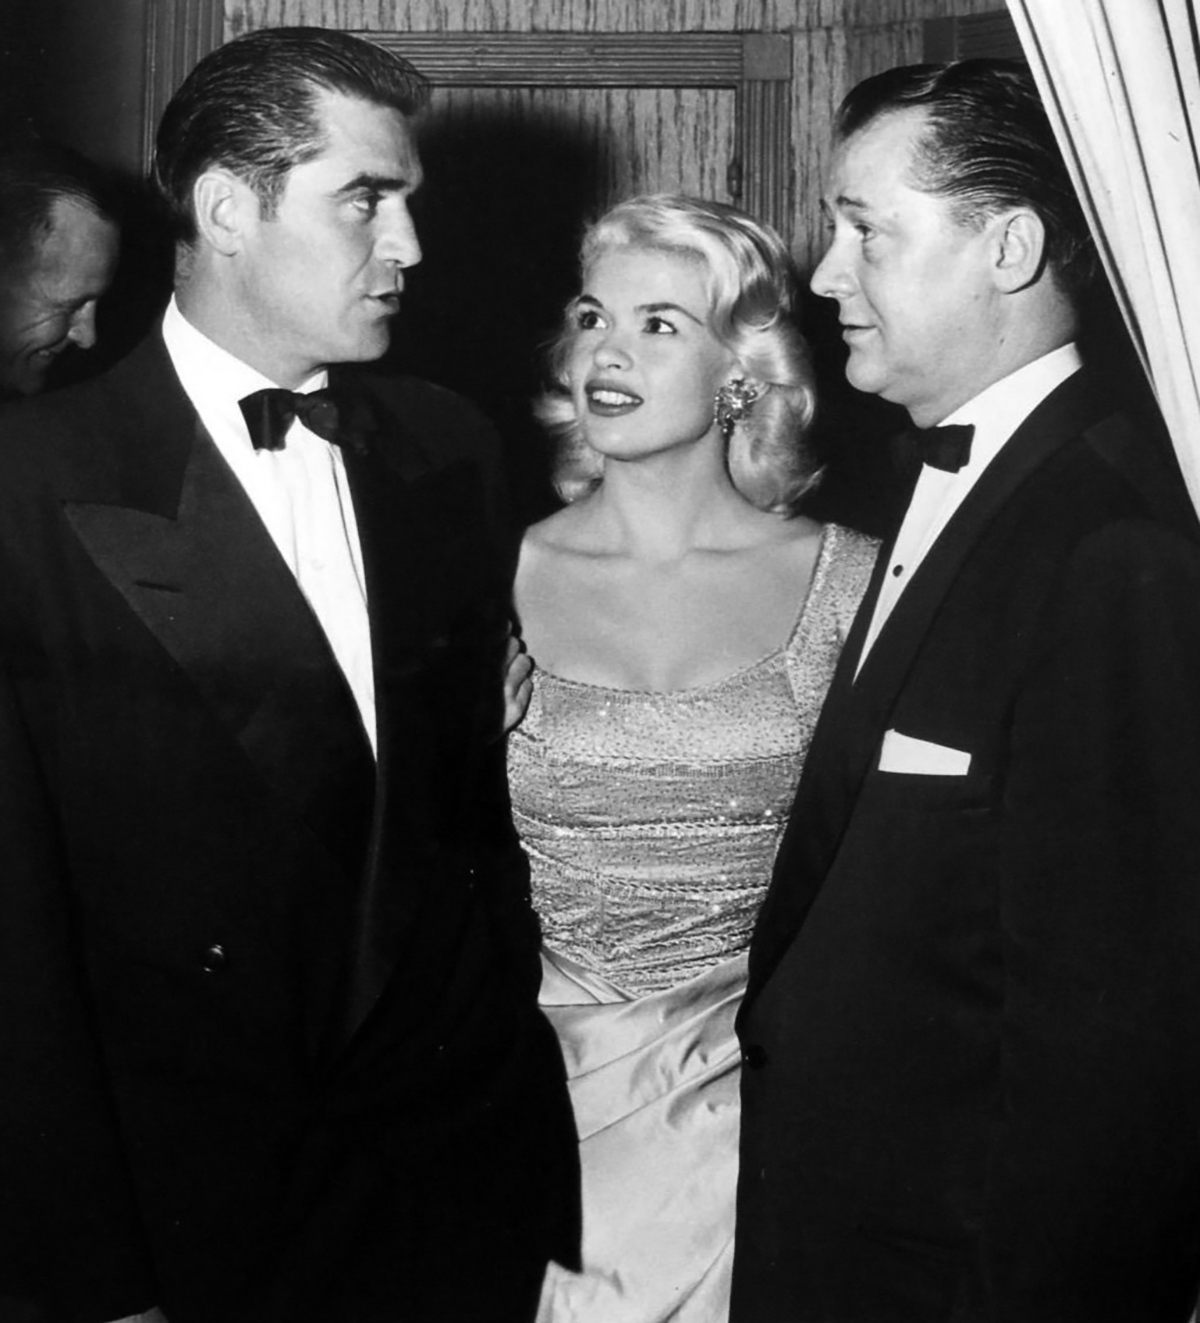 Steve_Cochran, Jayne_Mansfield and unidentified man,1957. Photo courtesy of publicty photo